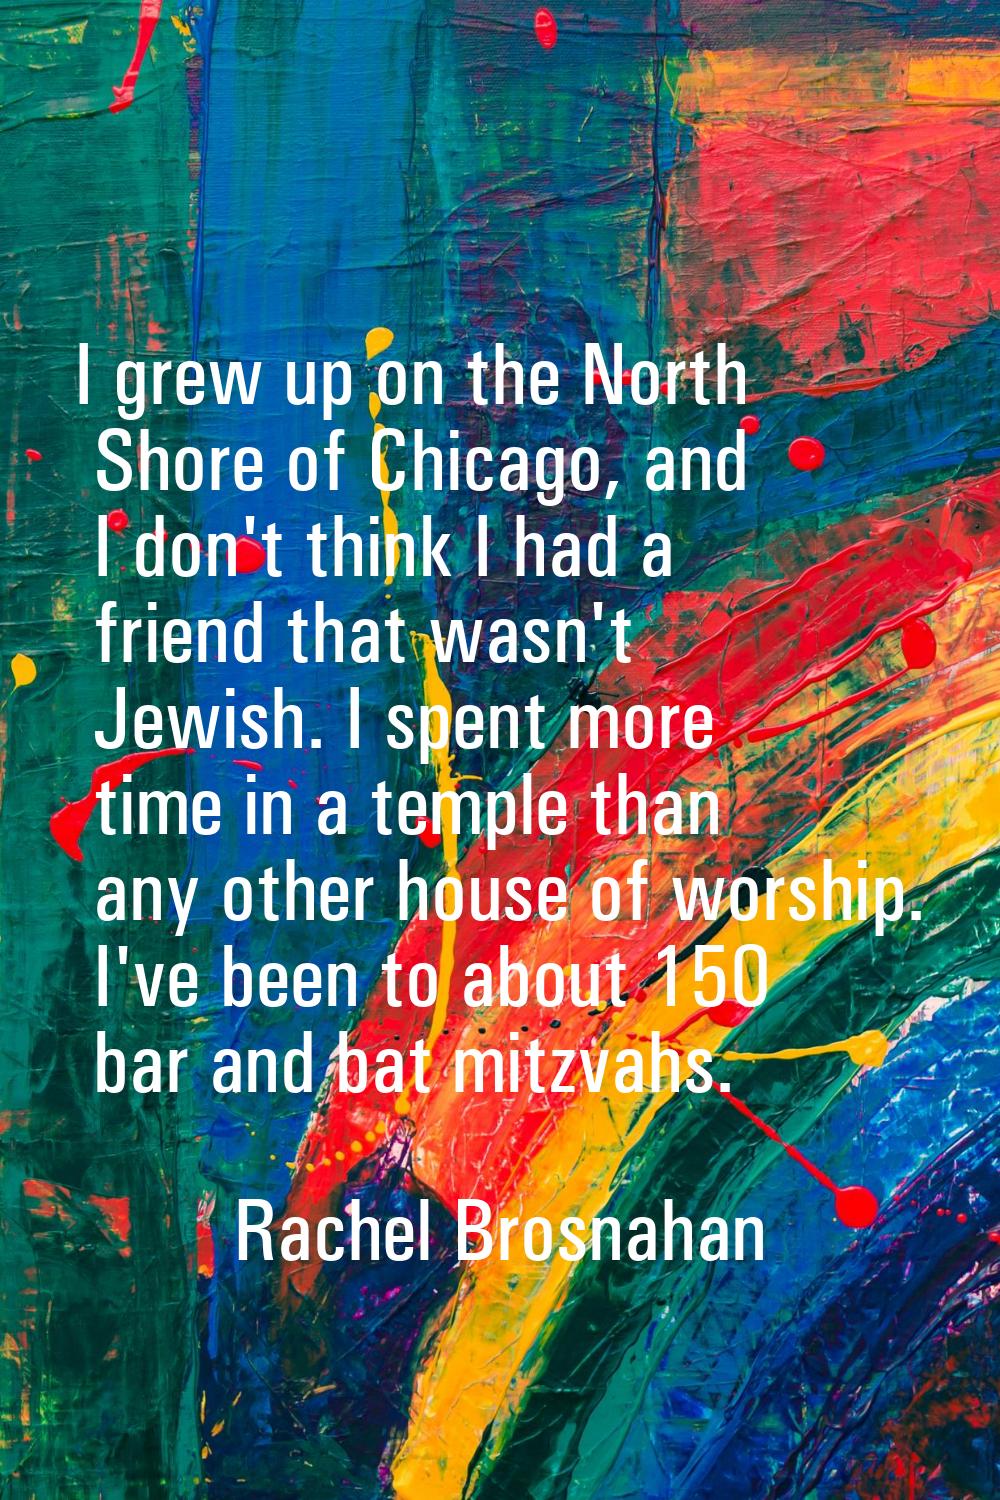 I grew up on the North Shore of Chicago, and I don't think I had a friend that wasn't Jewish. I spe